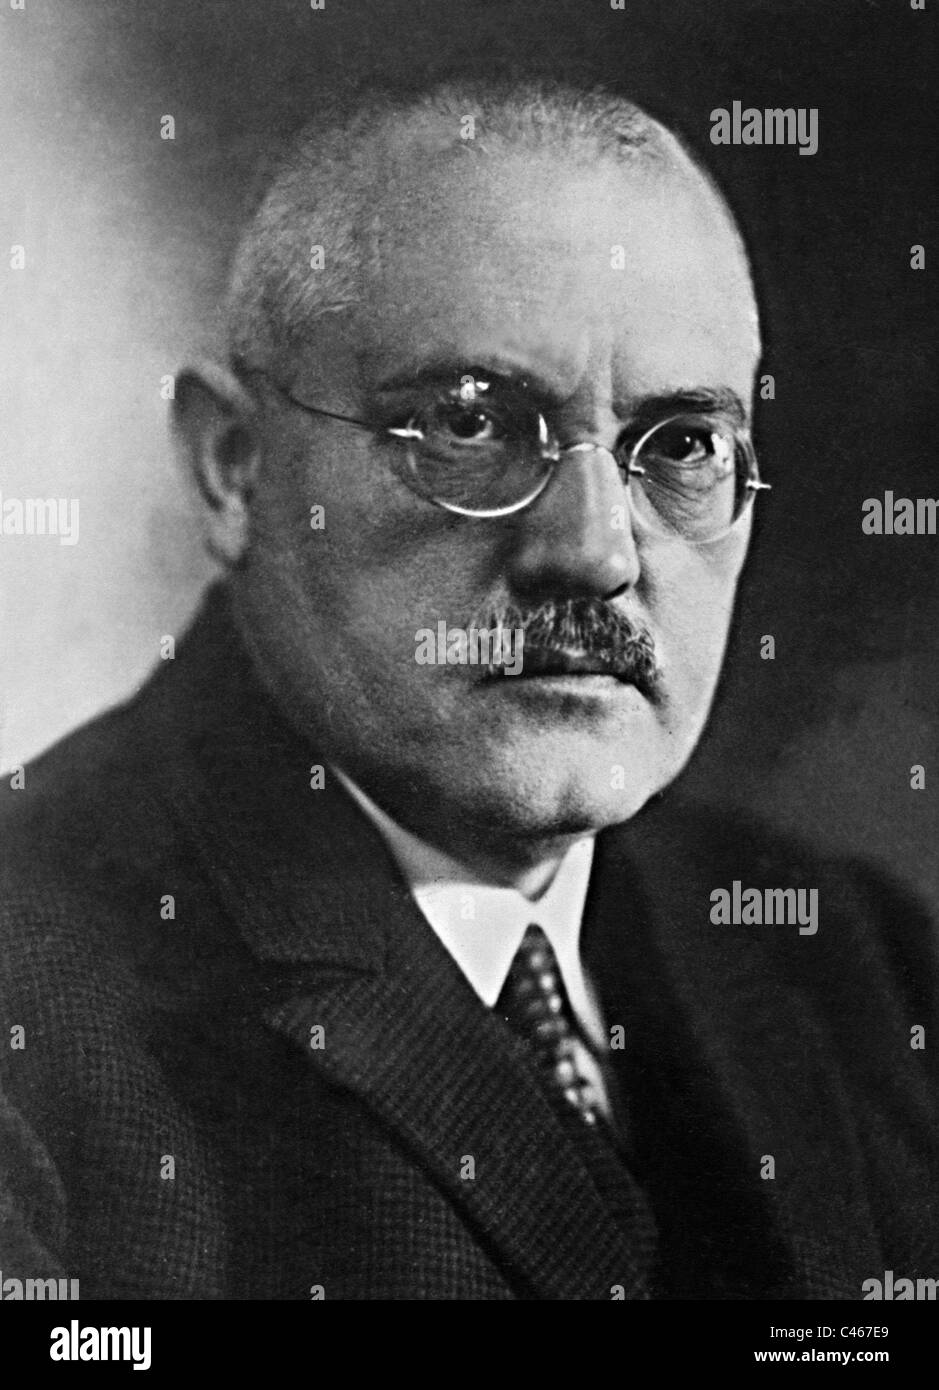 Carl Bosch (1874-1940), German industrial chemist. Bosch worked with Fritz  Haber to develop the Haber-Bosch process, which they patented in 1910. This  Stock Photo - Alamy